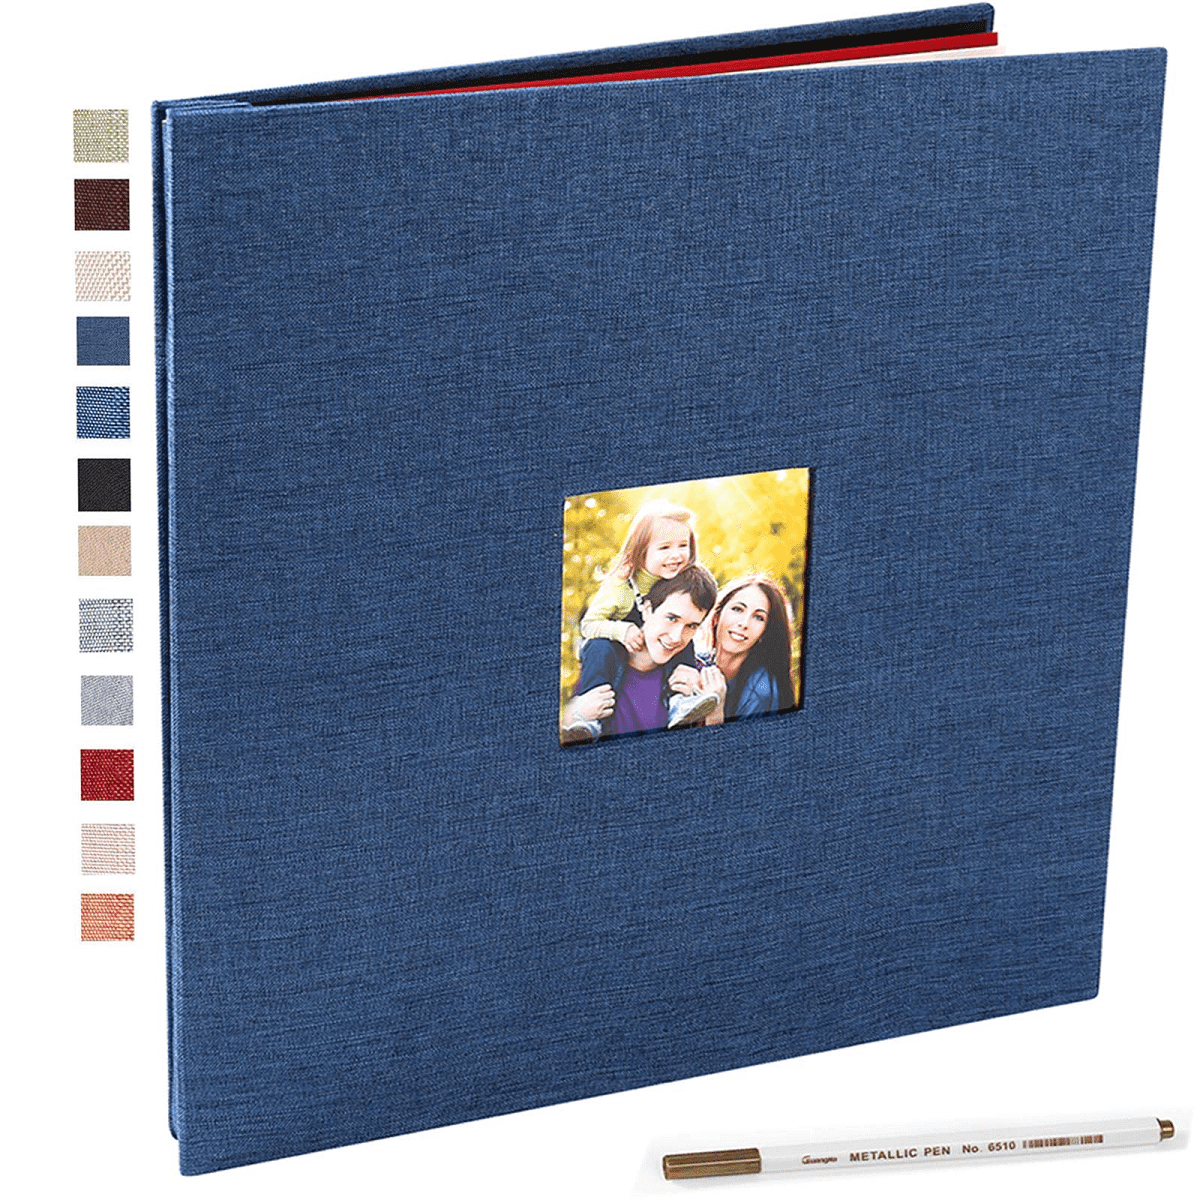  potricher Large Photo Album Self Adhesive 3x5 4x6 5x7 8x10  10x12 Pictures Linen Cover 40 Blank Pages Magnetic DIY Scrapbook Album with  A Metallic Pen (Blue, 13.2x12.8 inches 40 Pages) 